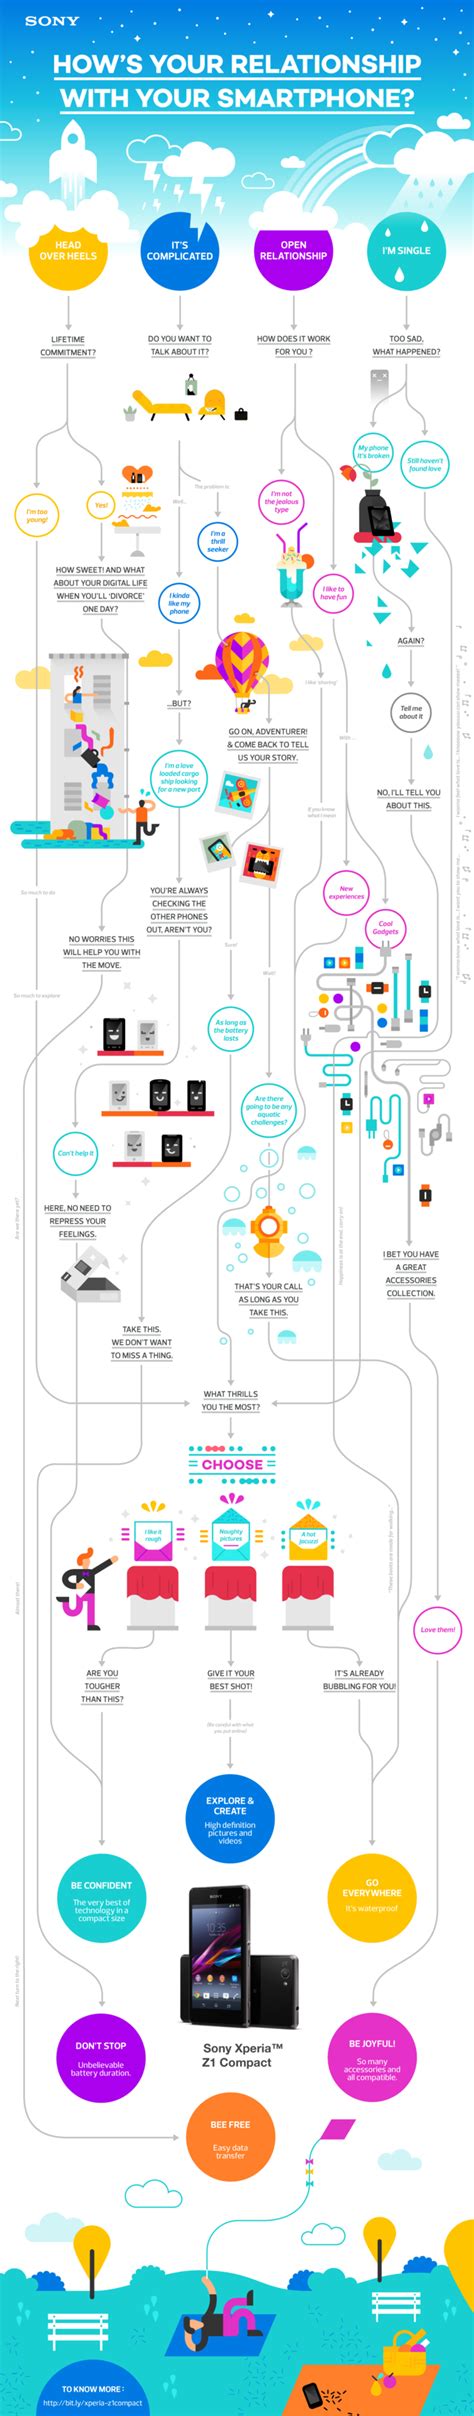 Hows Your Relationship With Your Smartphone Infographic Visualistan